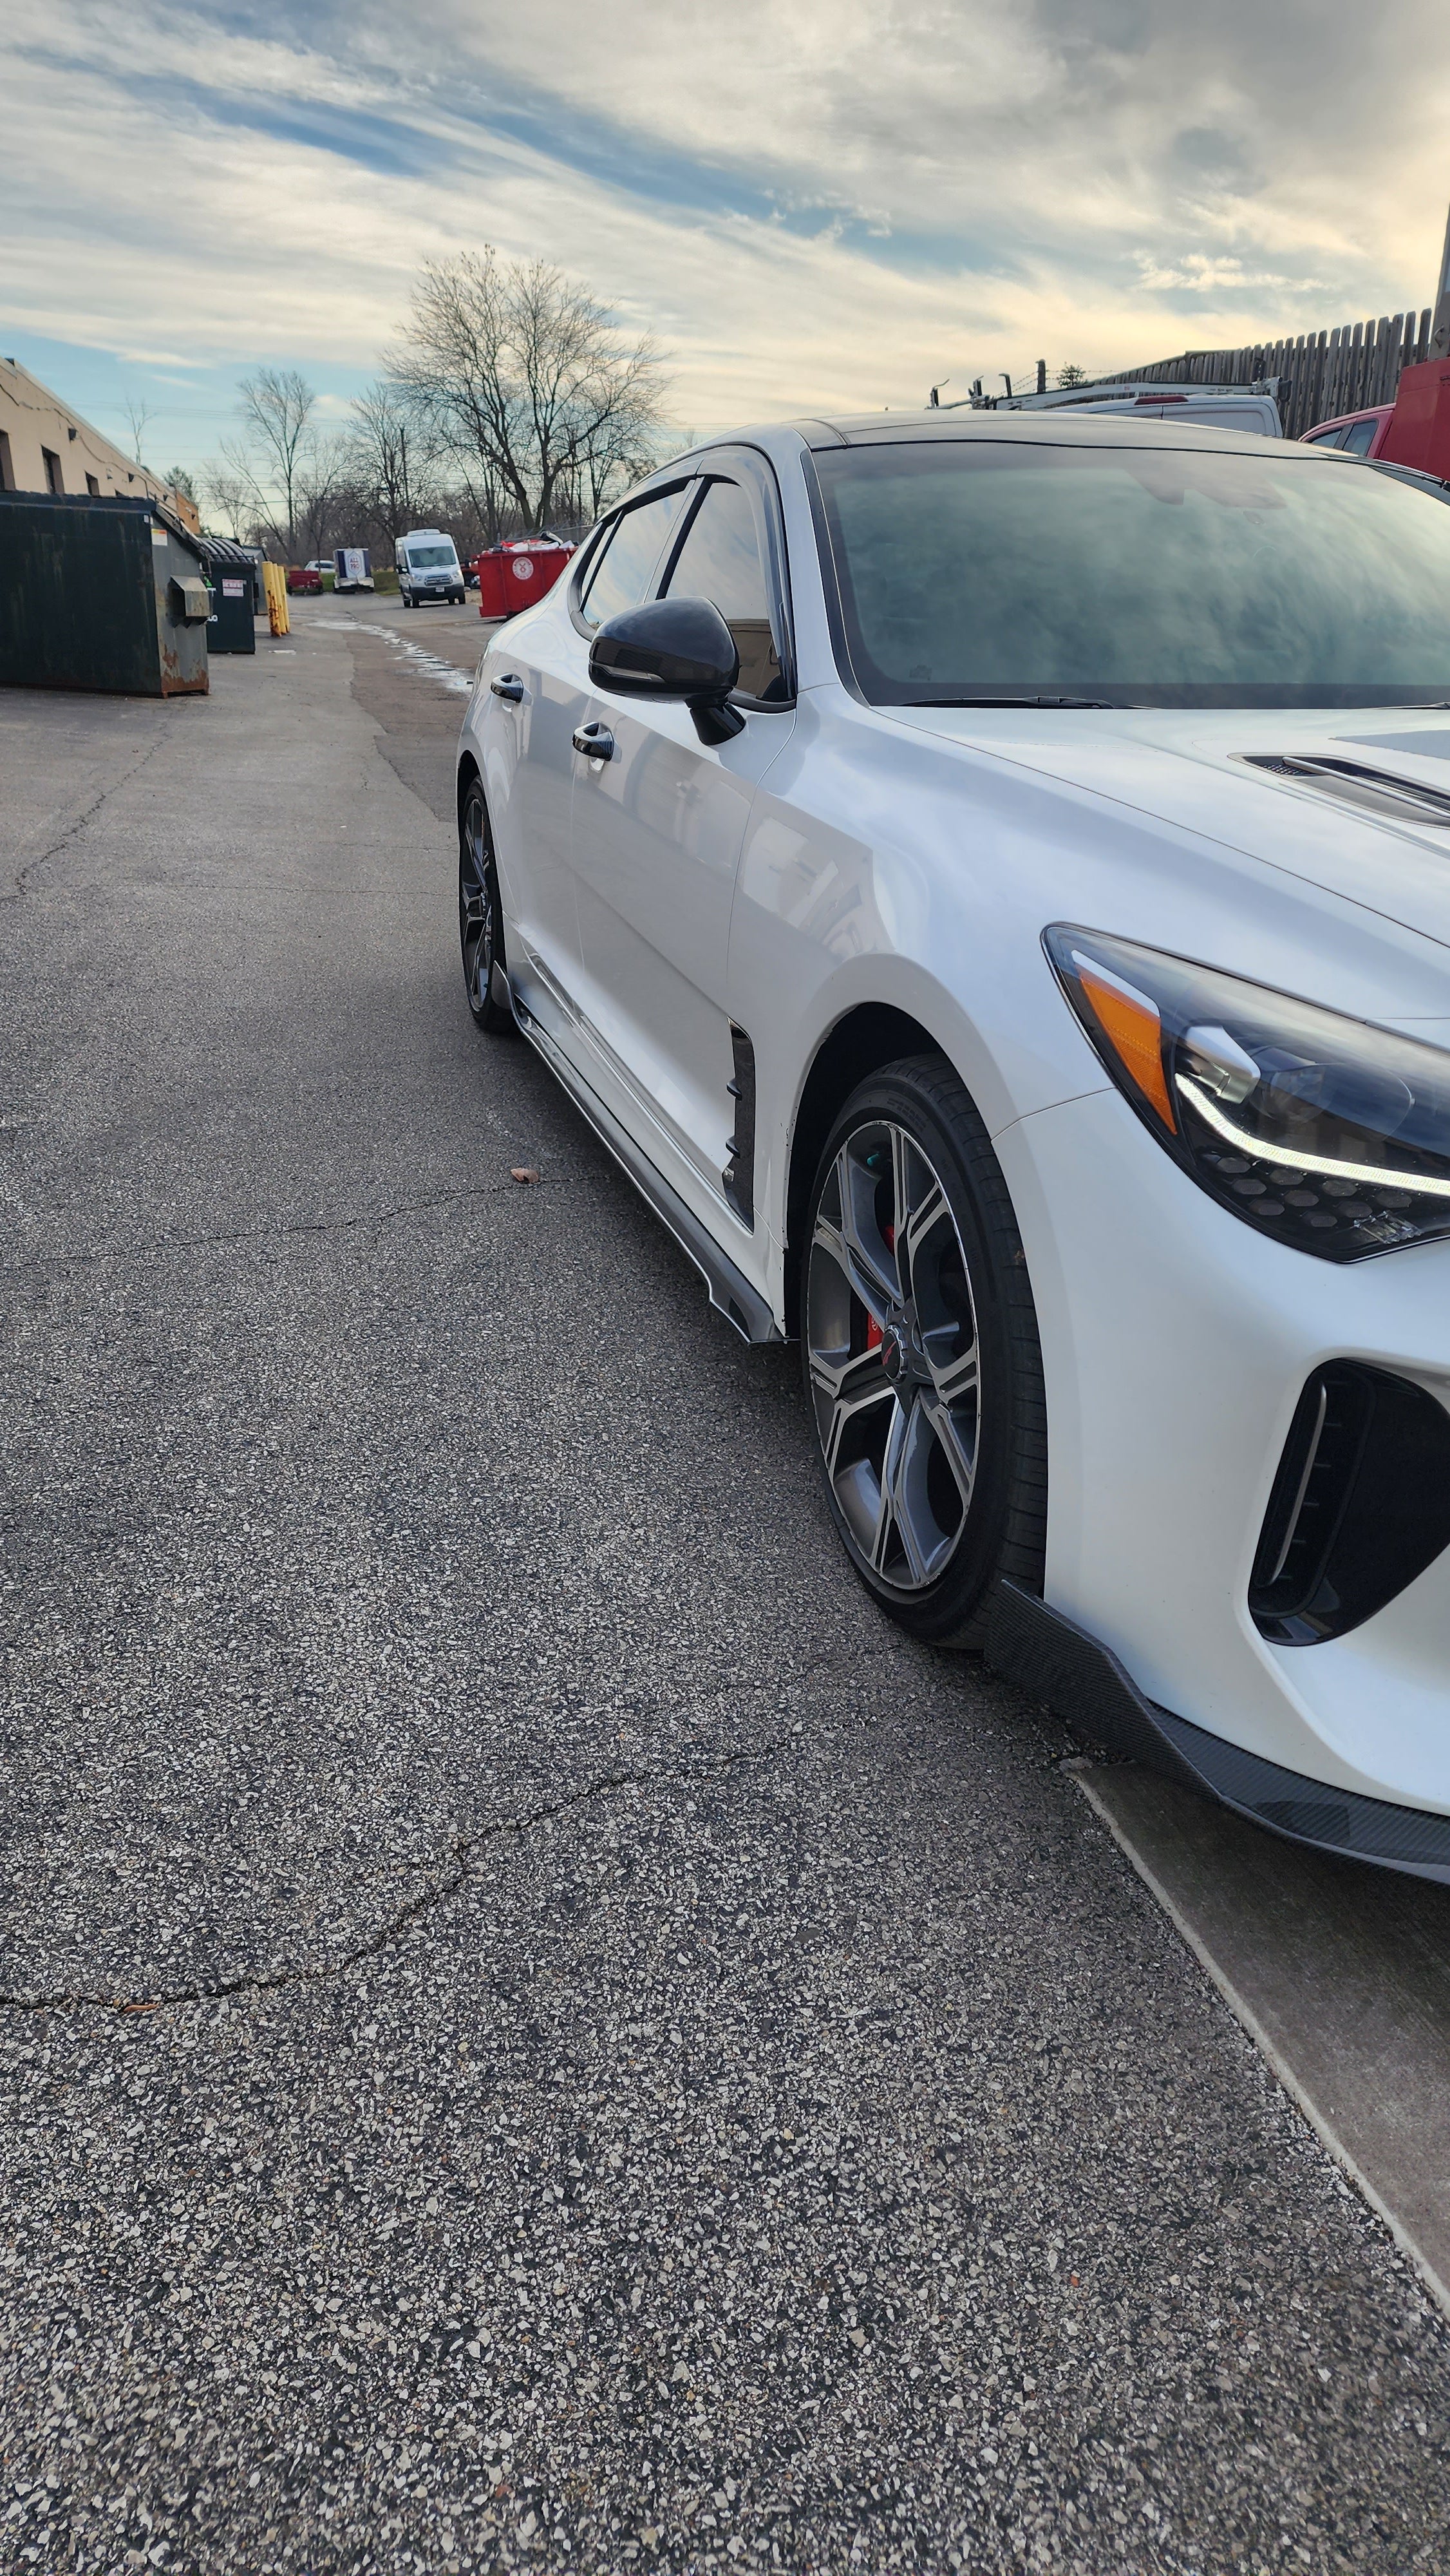 Wide shot of the Kia Stinger featuring the Jalisco CF Side Skirts, capturing the enhanced dynamic and aggressive stance provided by the skirts.